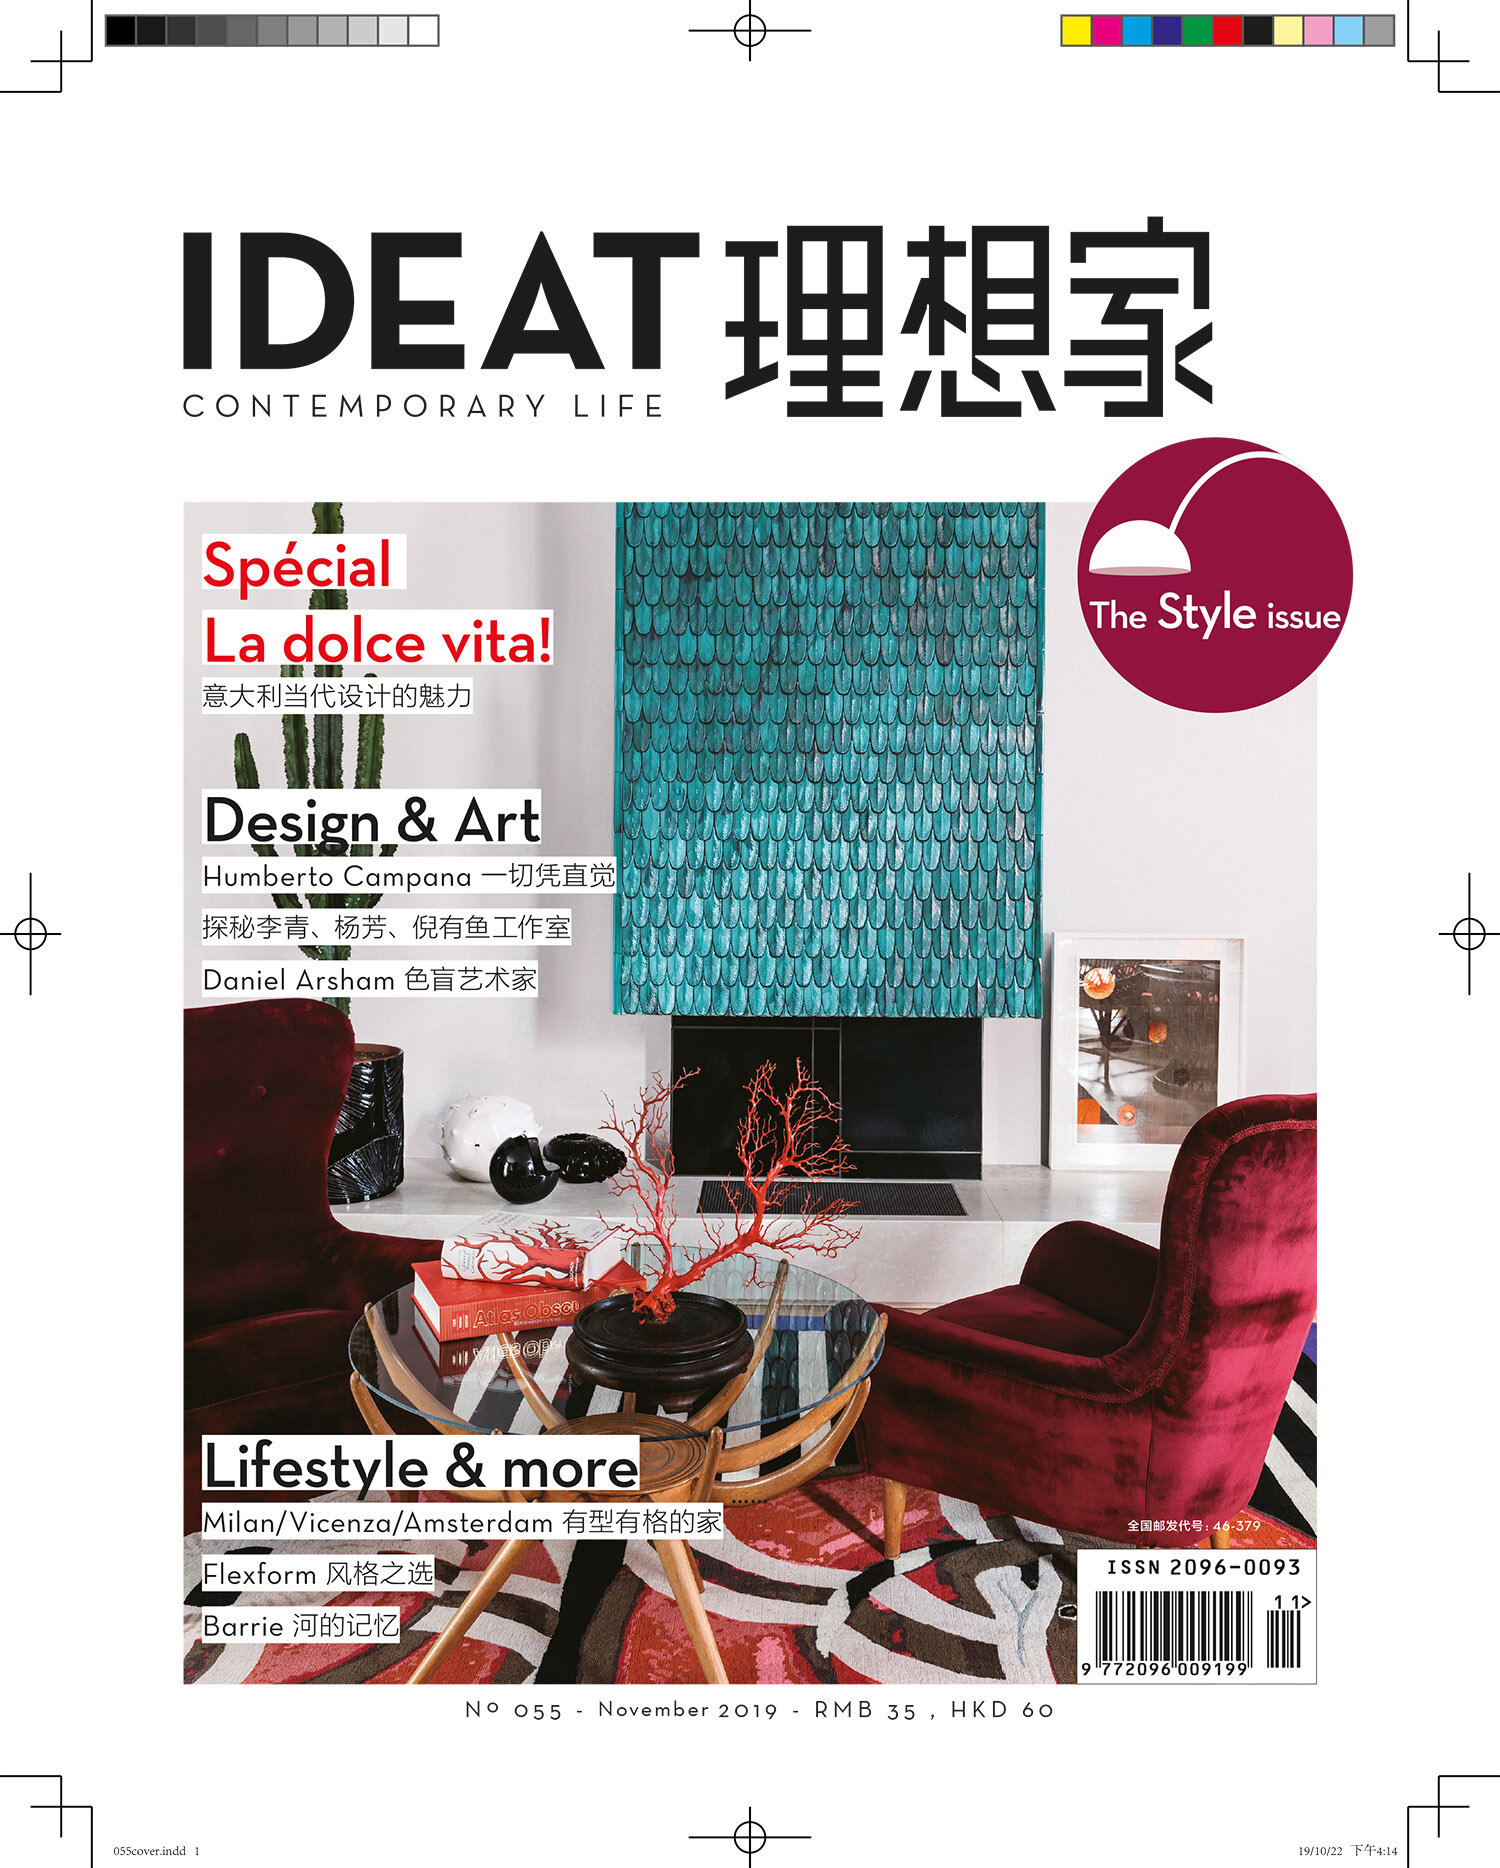 IDEAT Cover 2019.jpg